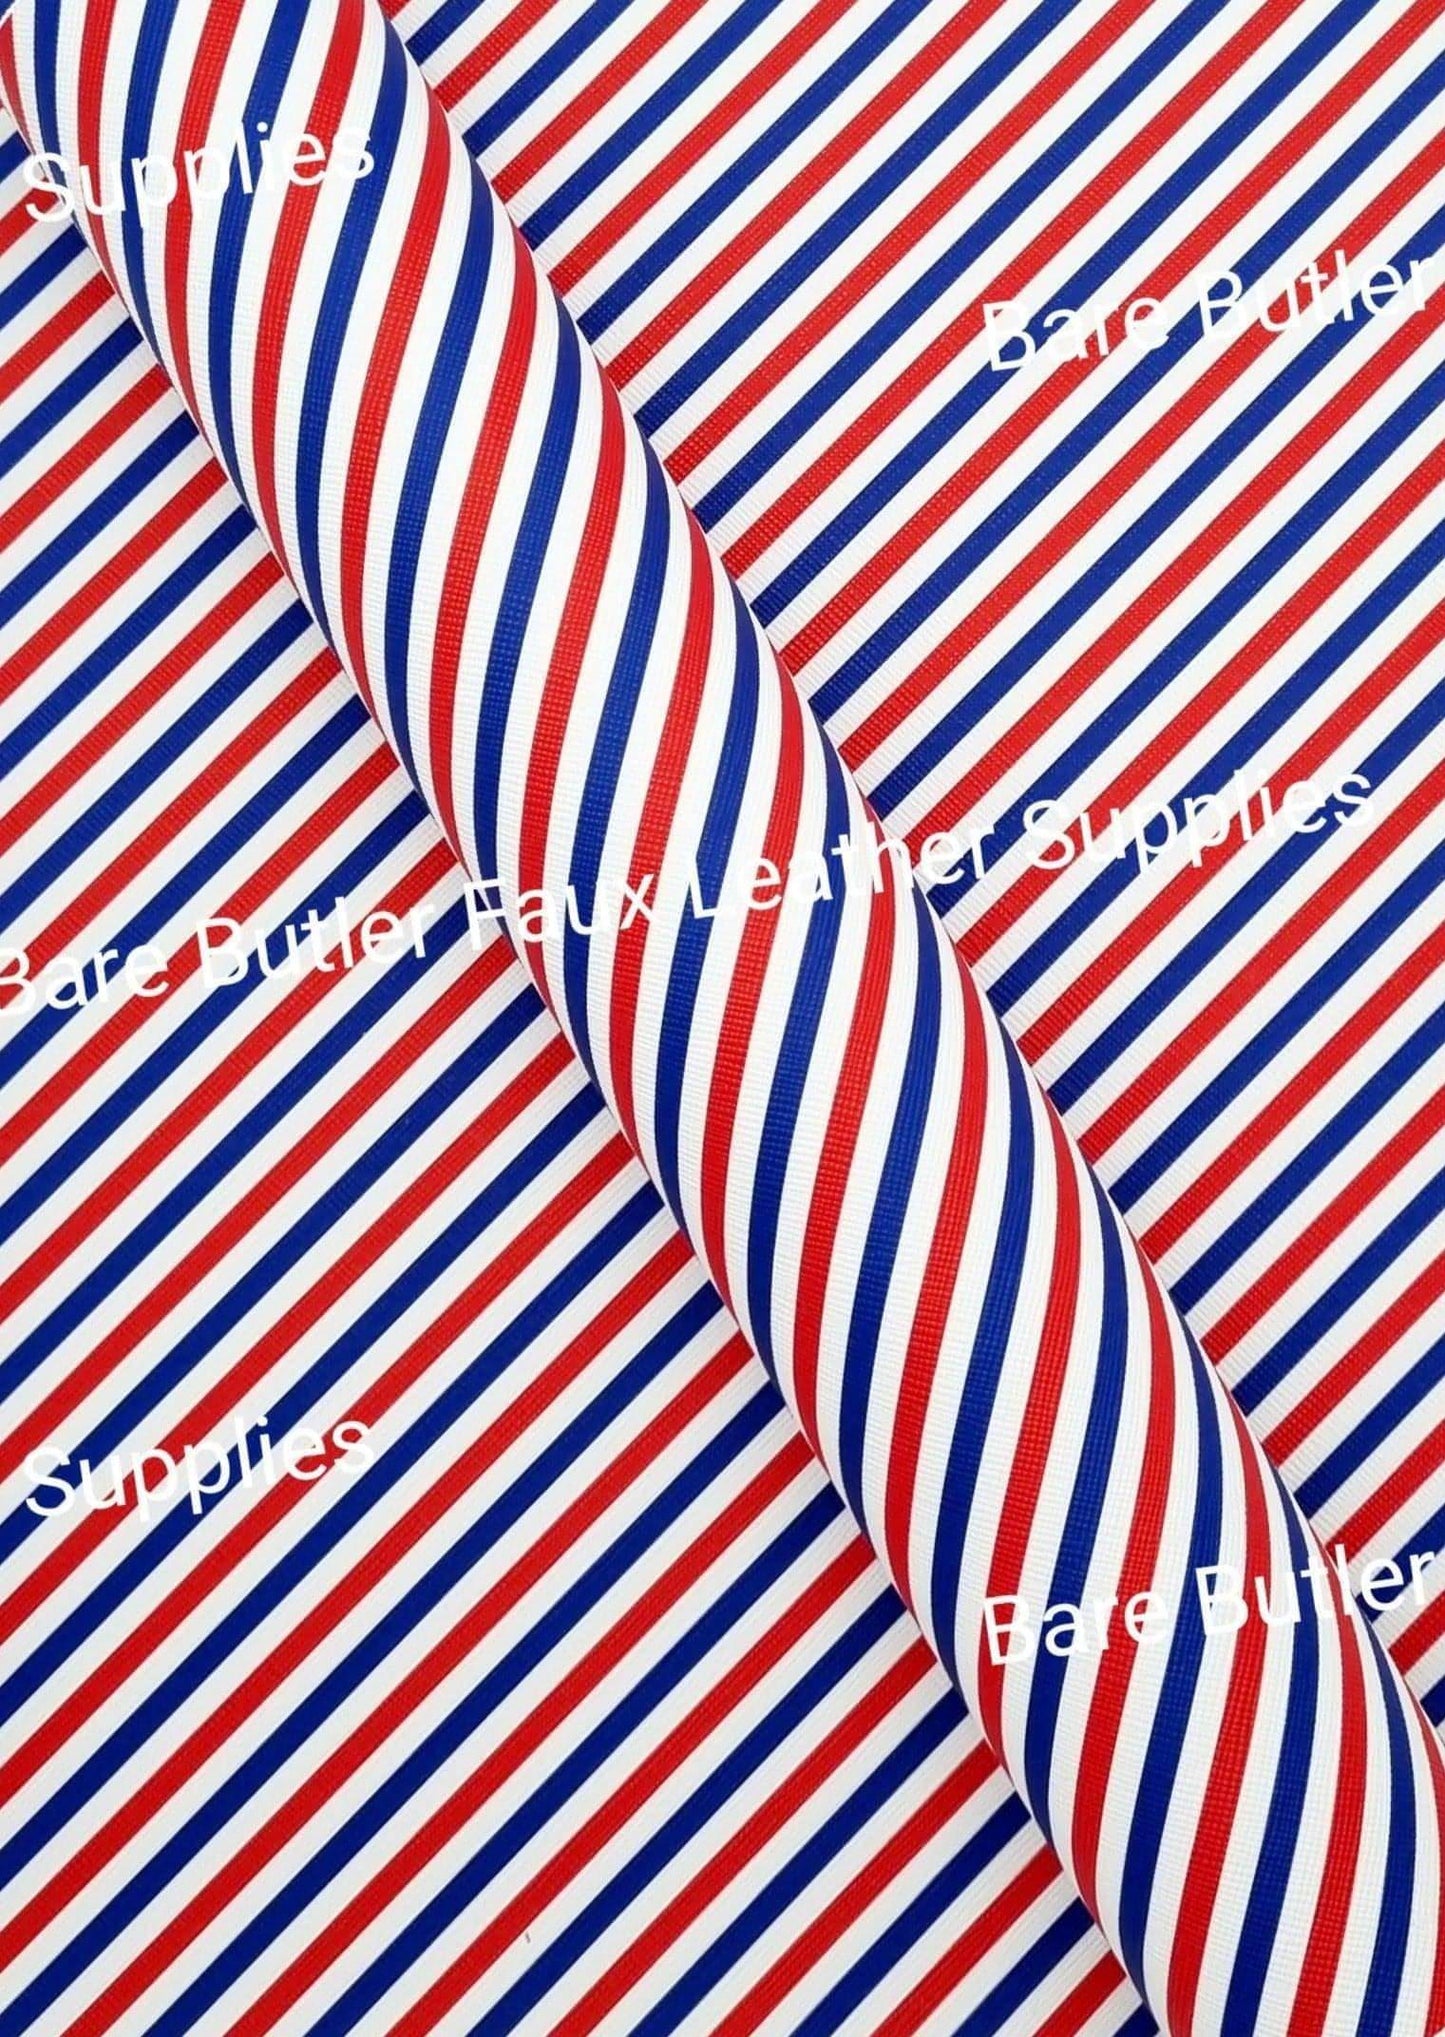 Blue & Red Diagonal Stripe Faux Leather - Fabric, Faux, Faux Leather, Leather, leatherette, Litchi - Bare Butler Faux Leather Supplies 